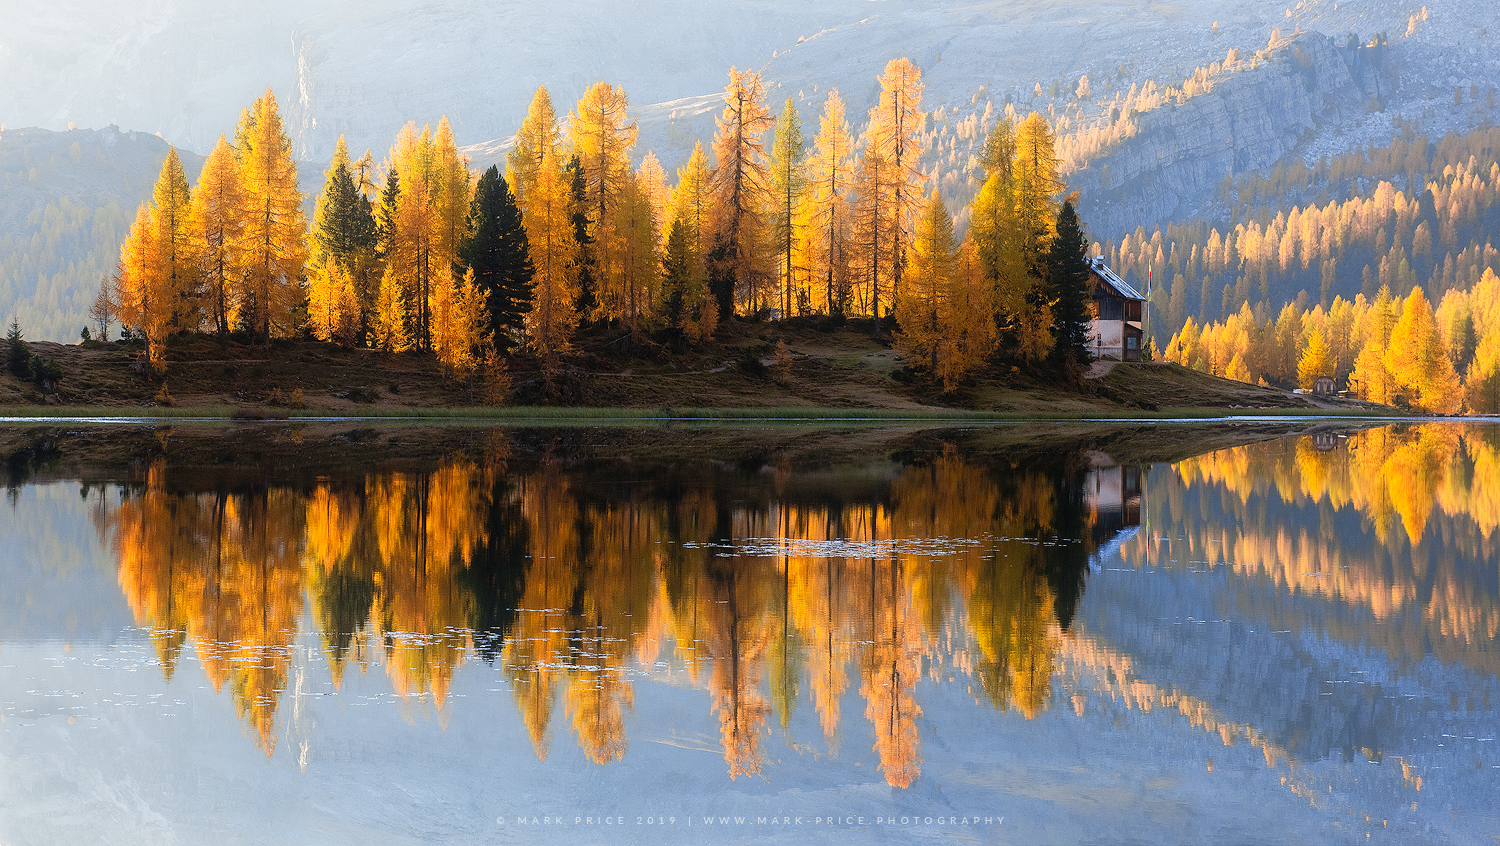 An island of larches lit by the morning sun in the Italian mountains